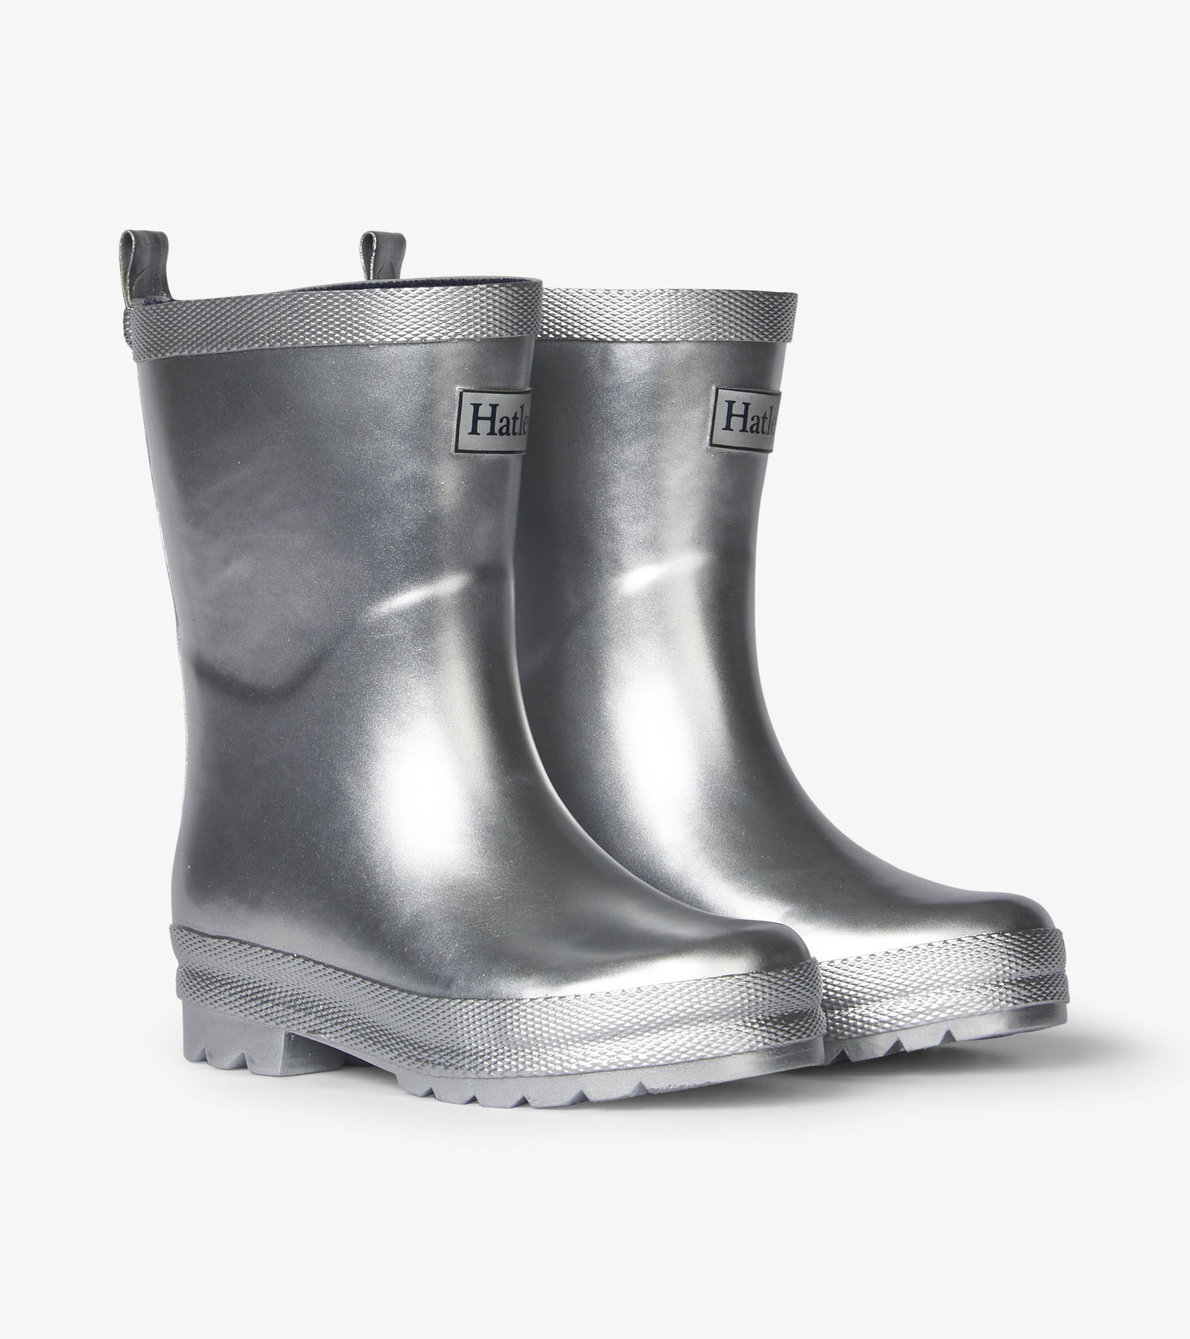 View larger image of Silver Shimmer Wellies